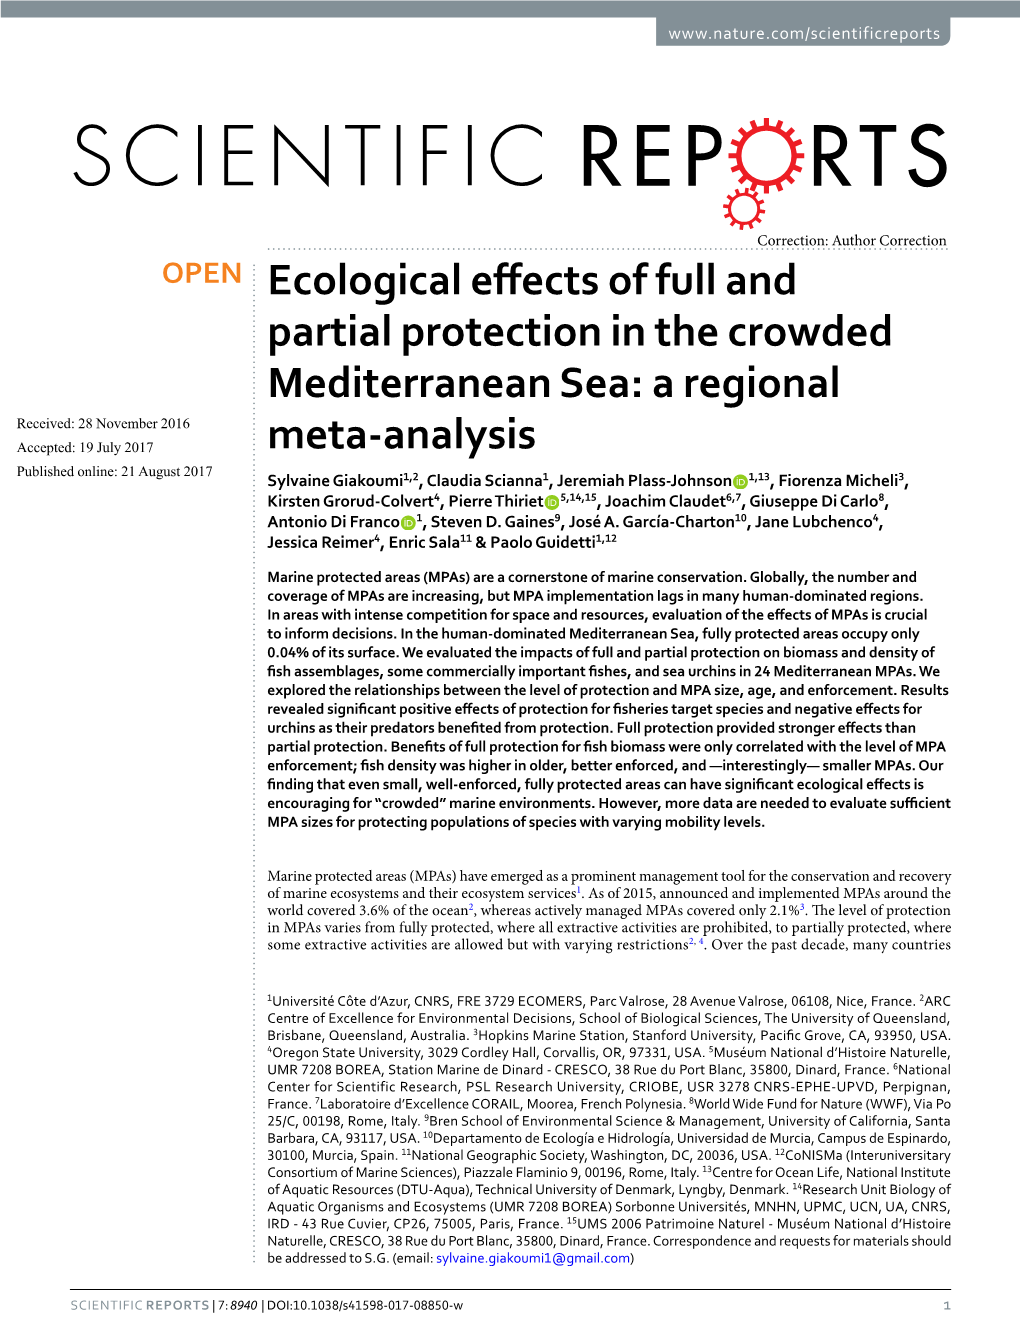 Ecological Effects of Full and Partial Protection in the Crowded Mediterranean Sea: a Regional Meta-Analysis